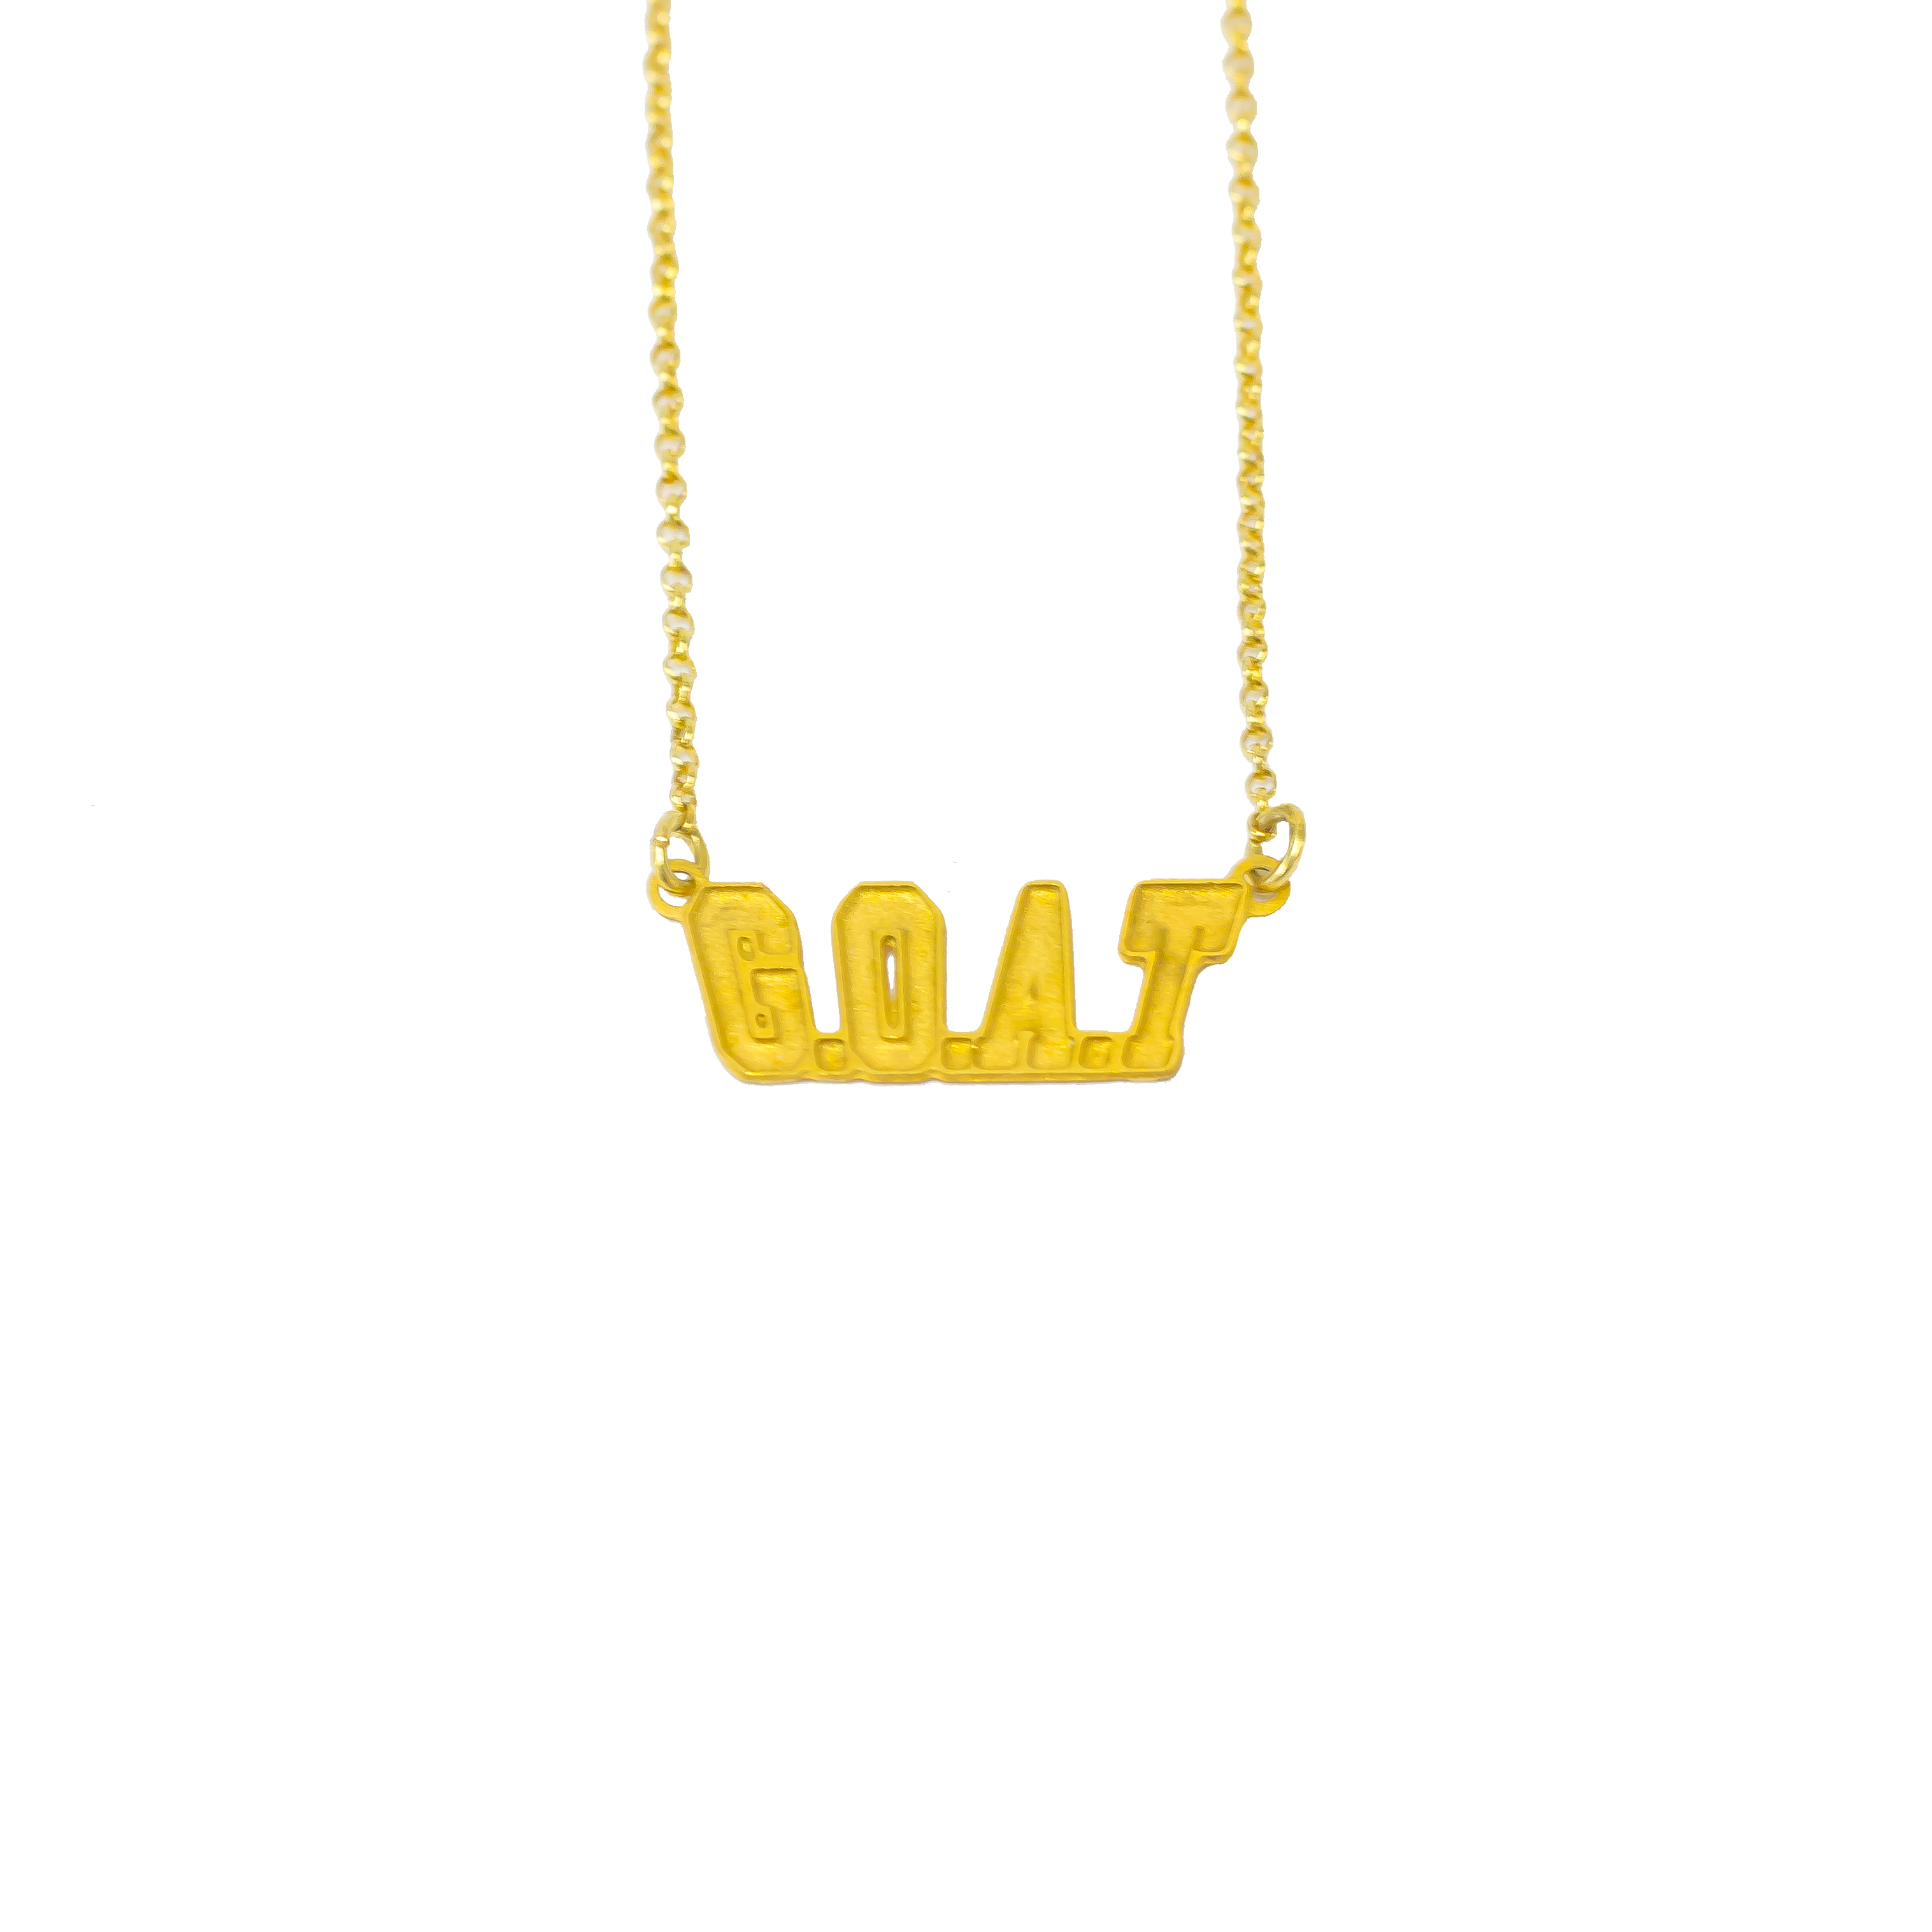 G.O.A.T Letterman Necklace - Gold